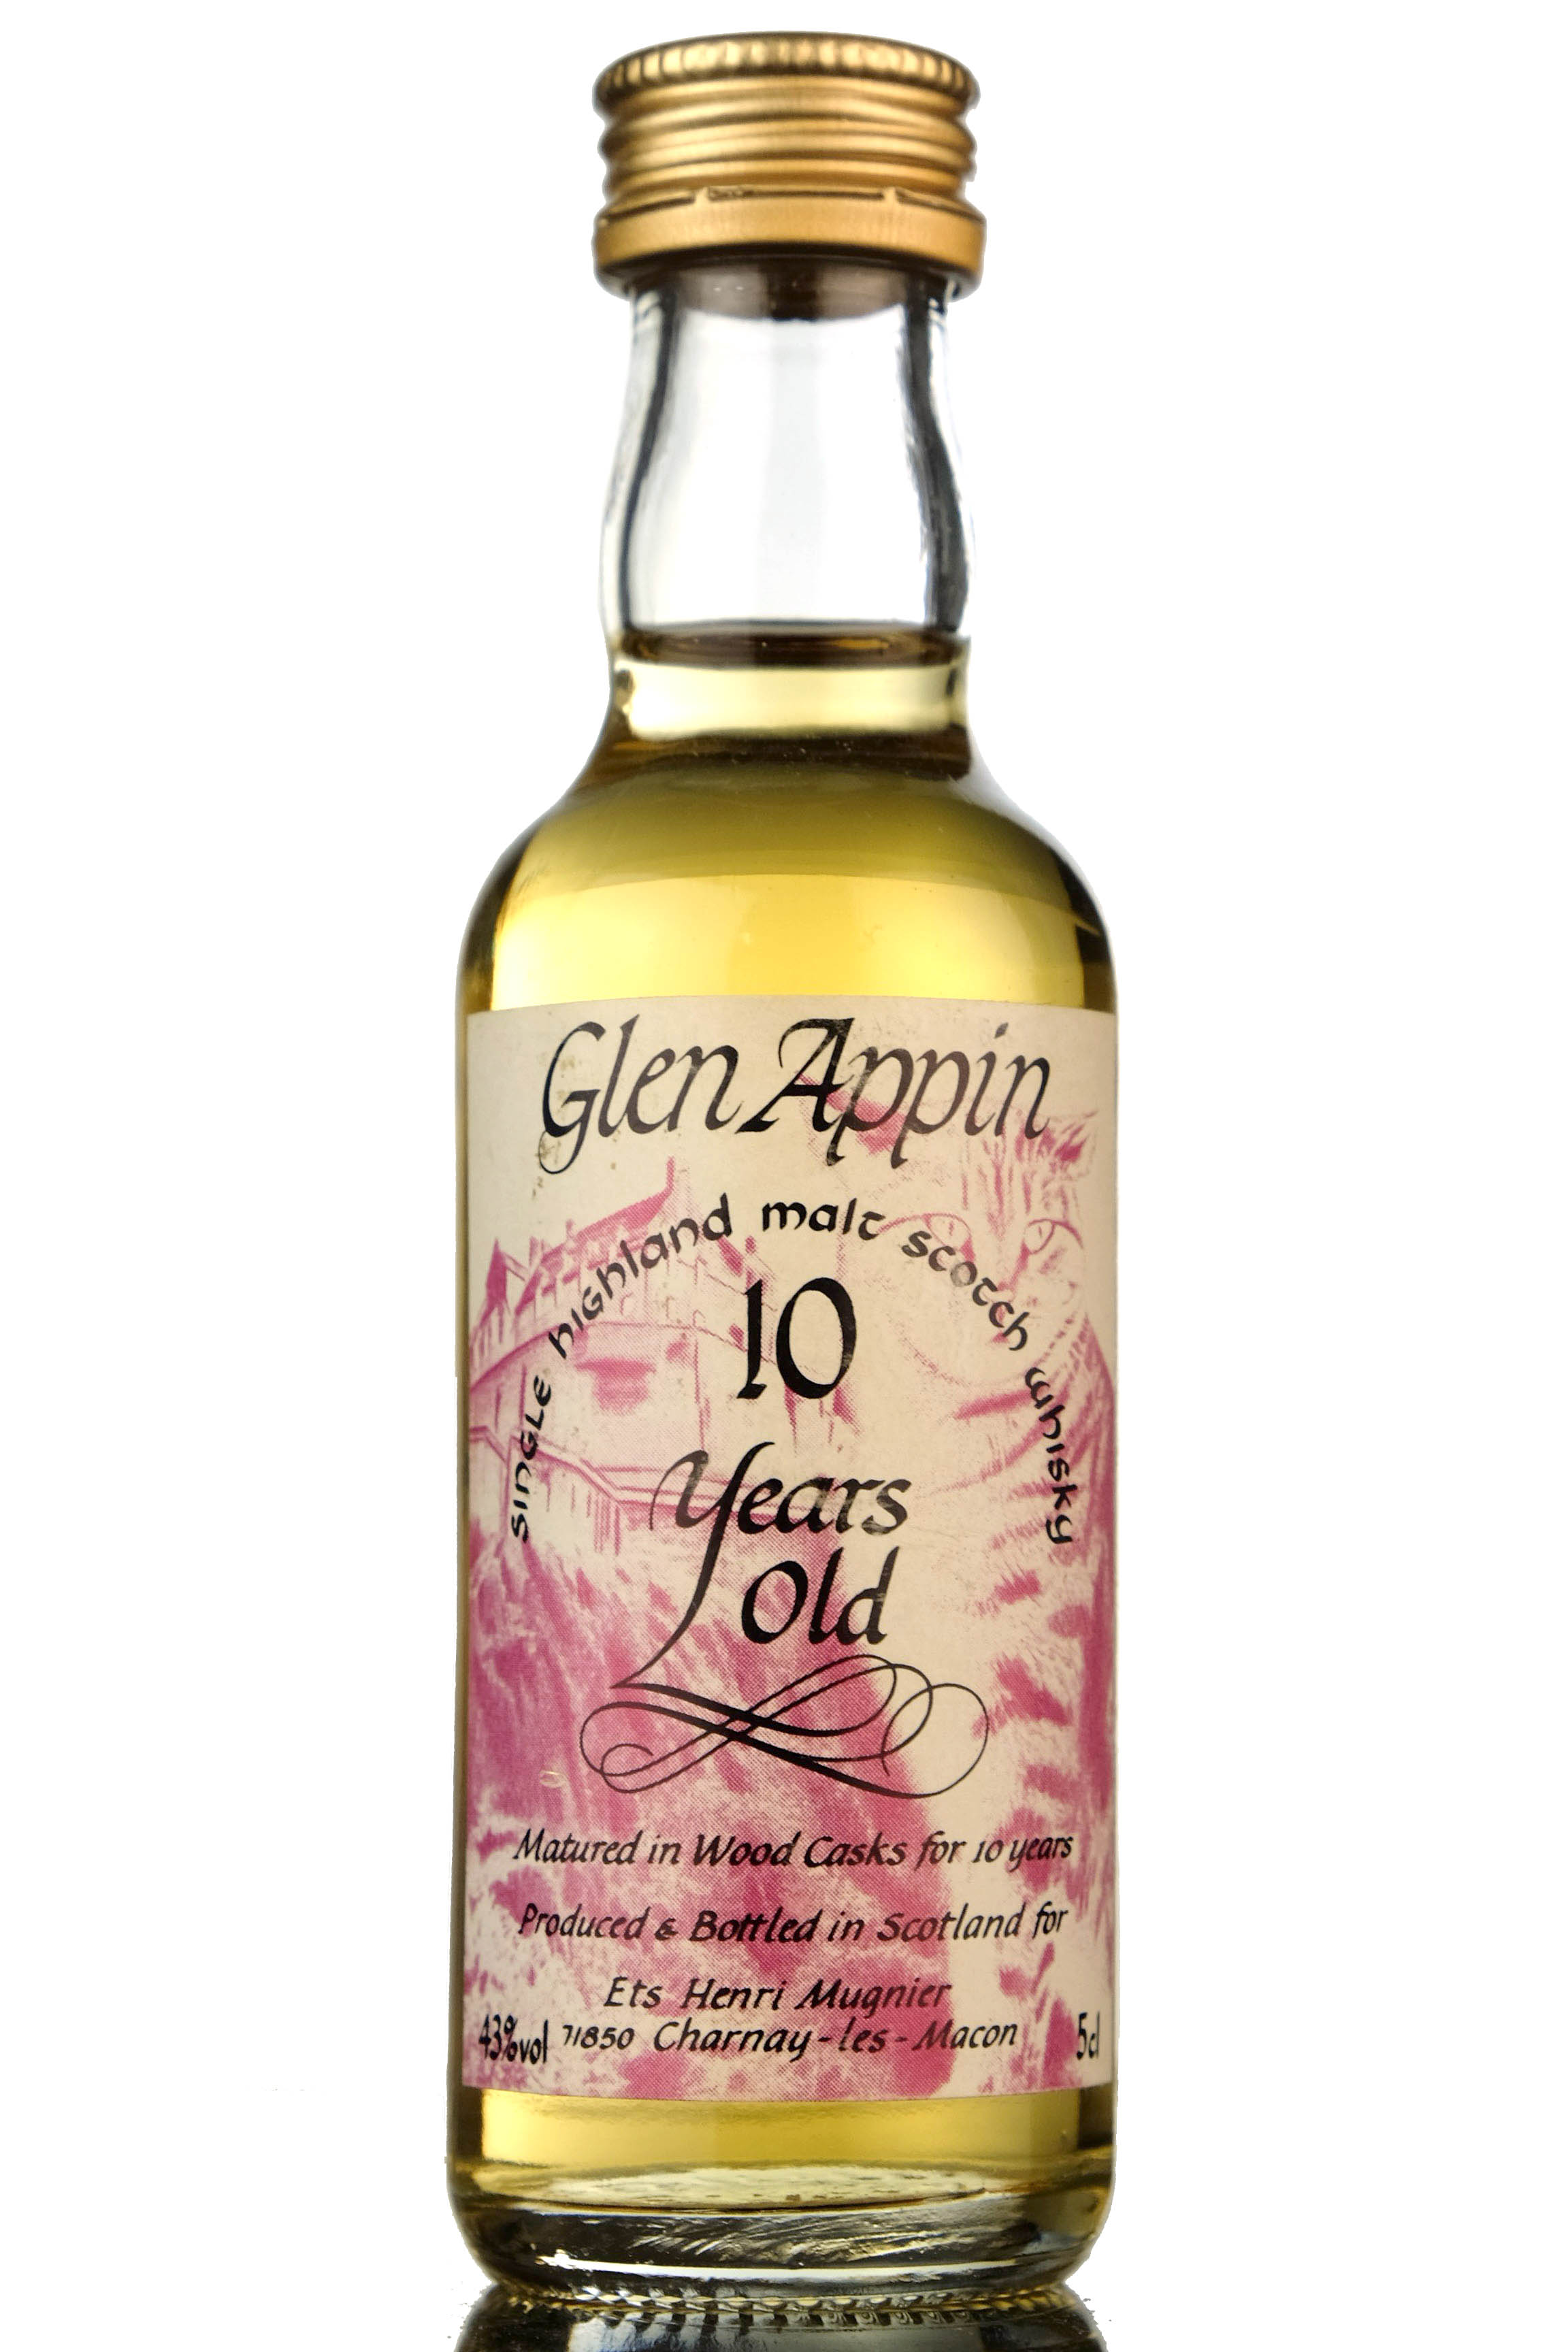 Glen Appin 10 Year Old Miniature